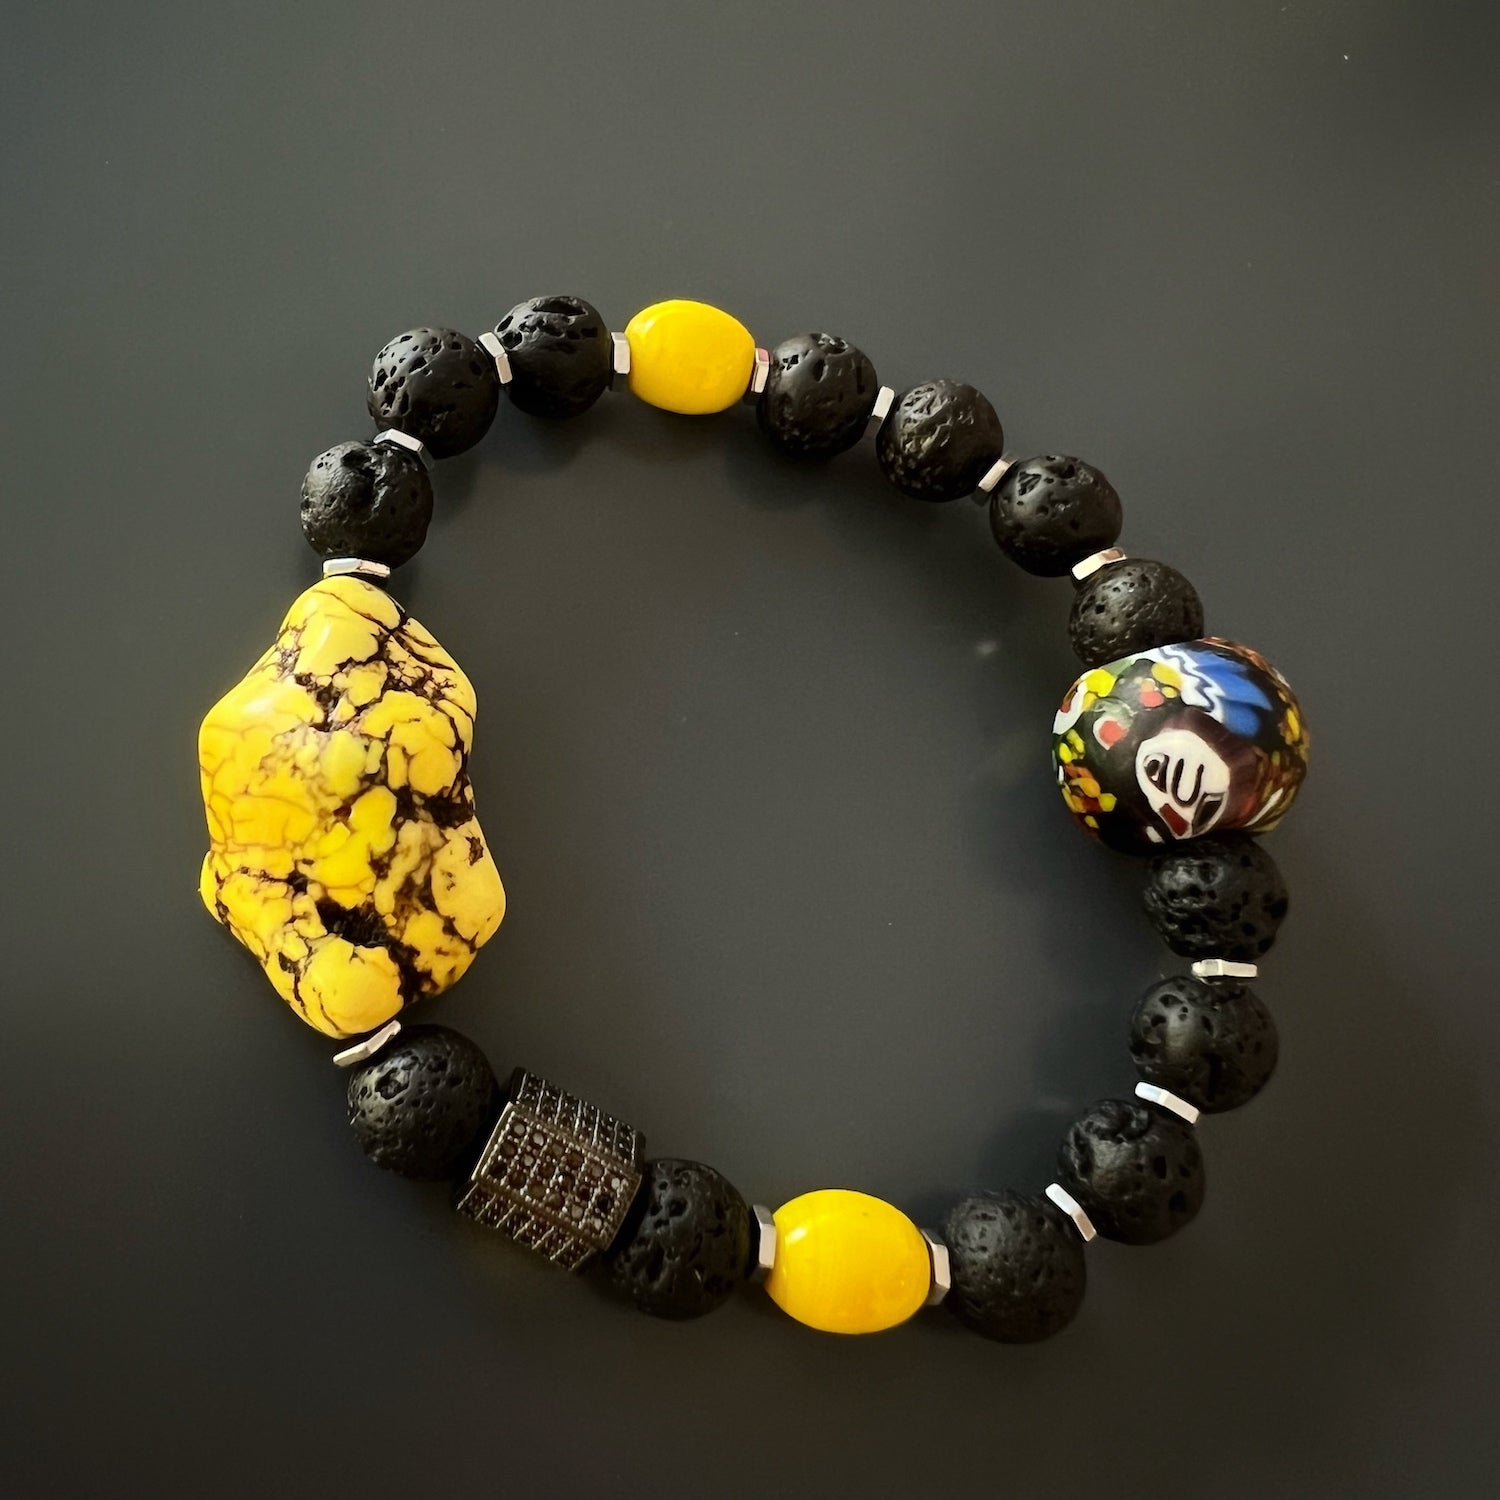 Handmade African bead featured in the African Yellow Turquoise Bracelet, highlighting its intricate design and craftsmanship.